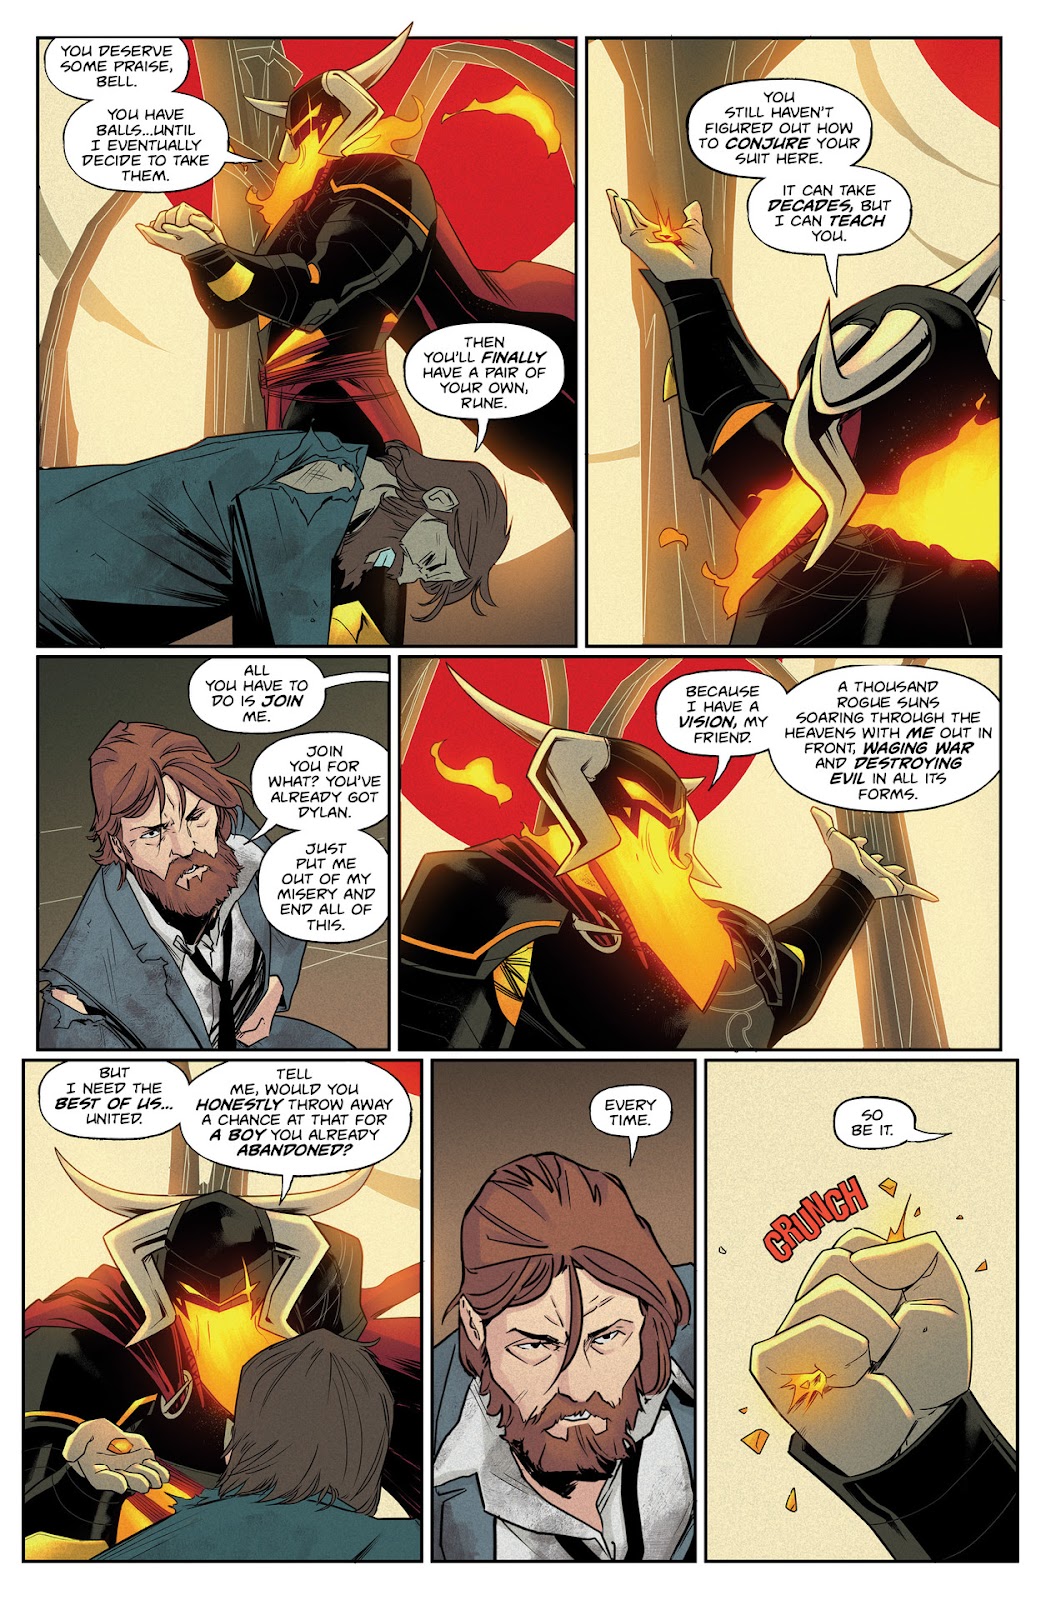 Rogue Sun issue 16 - Page 20